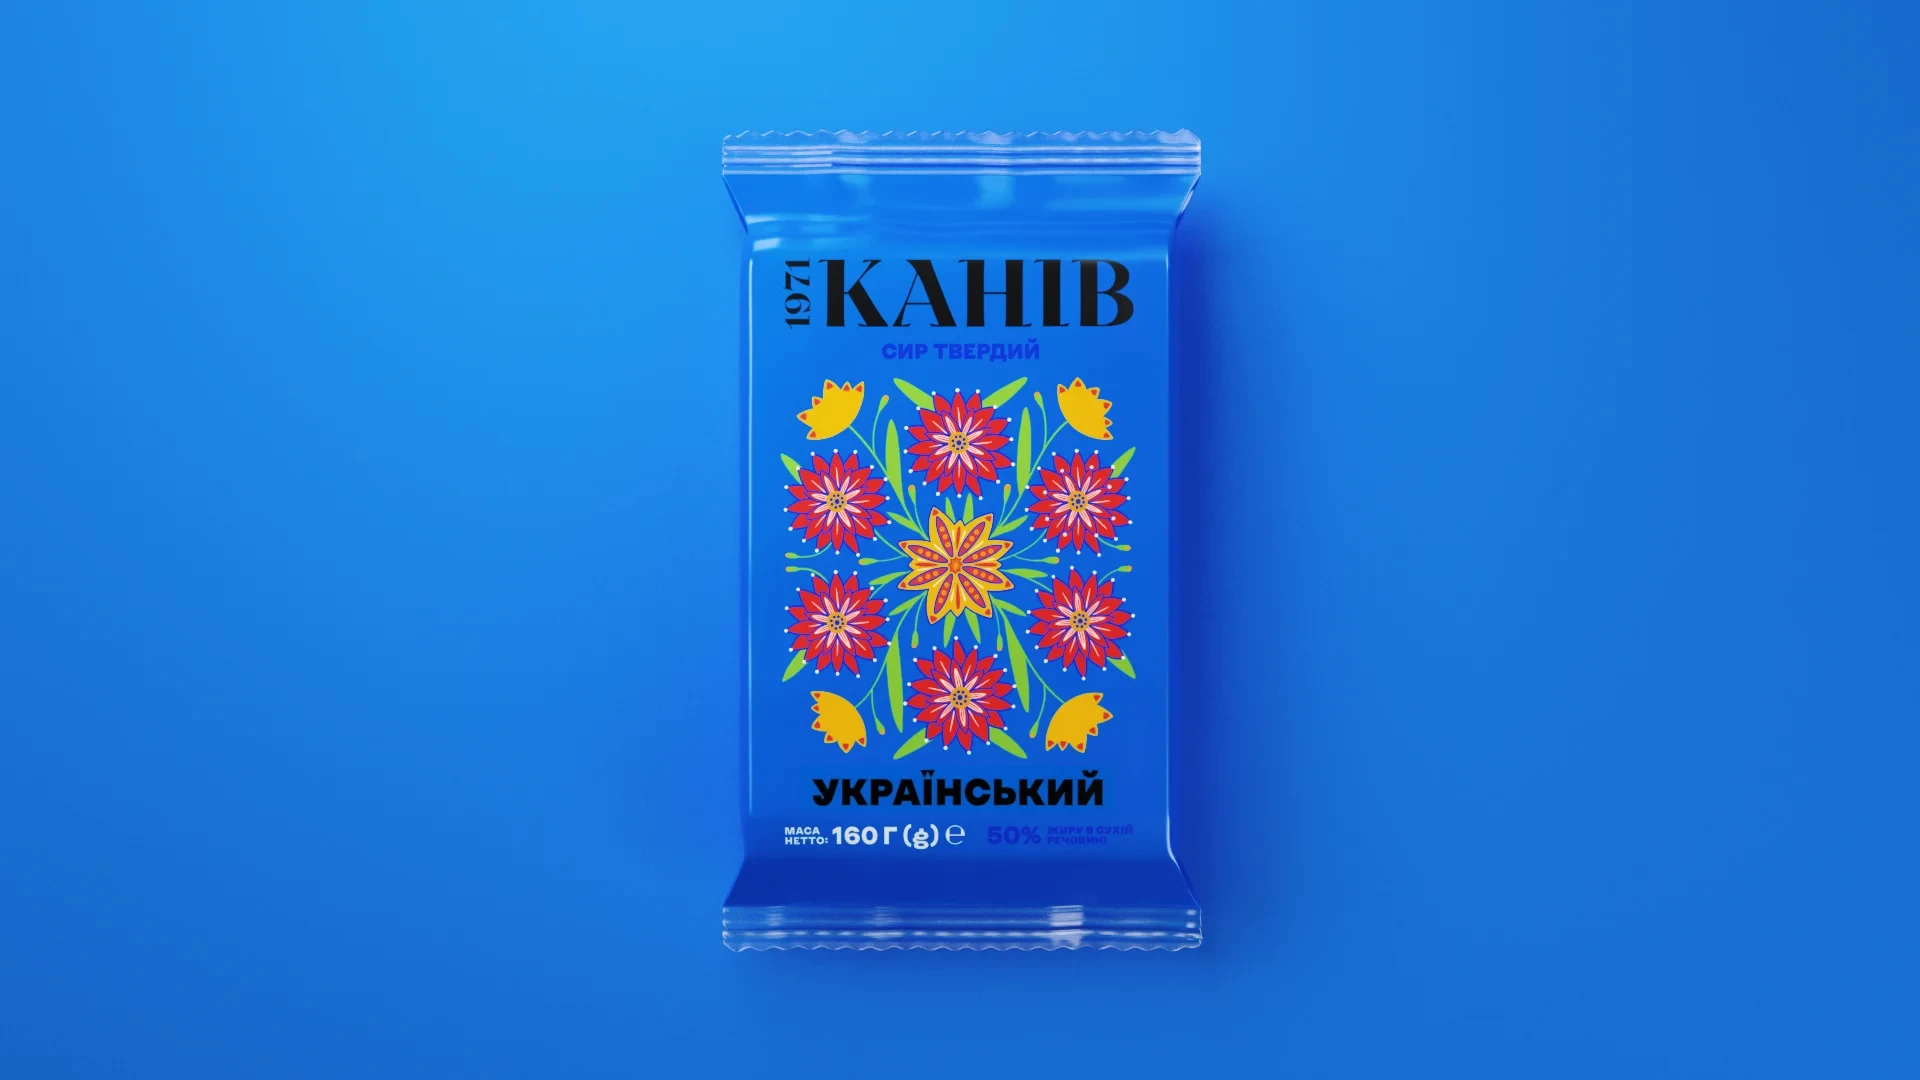 <div>Each package tells Ukrainians about endangered species that need protection. And about the picturesque region where they settled.</div>